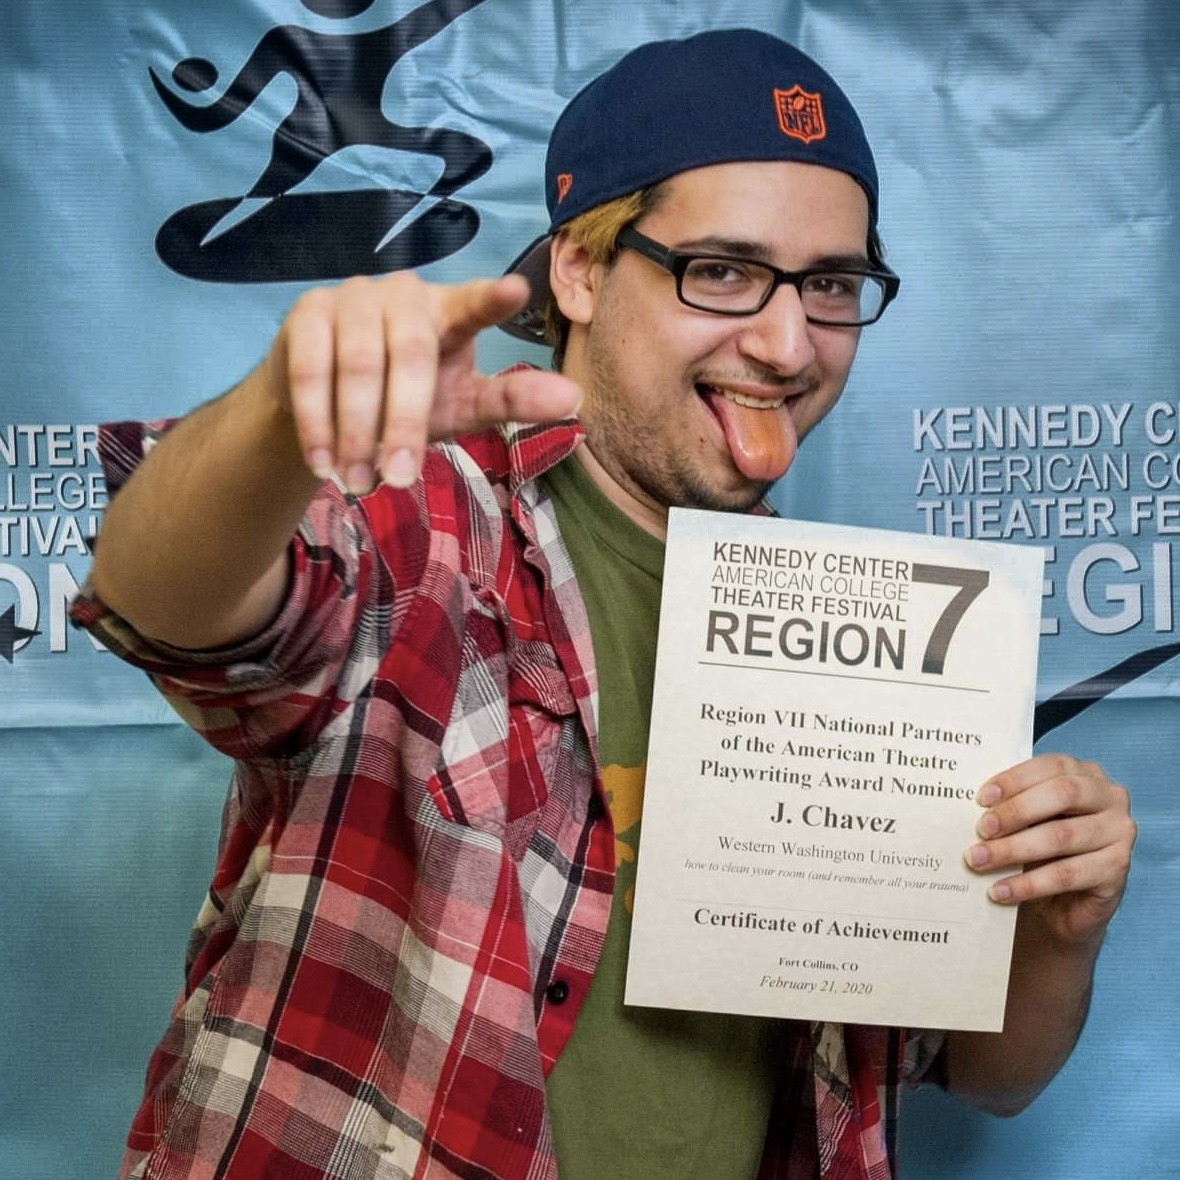 j. chavez in casual attire pointing, sticking out their tongue with a smile, holding a KCACTF certificate of achievement